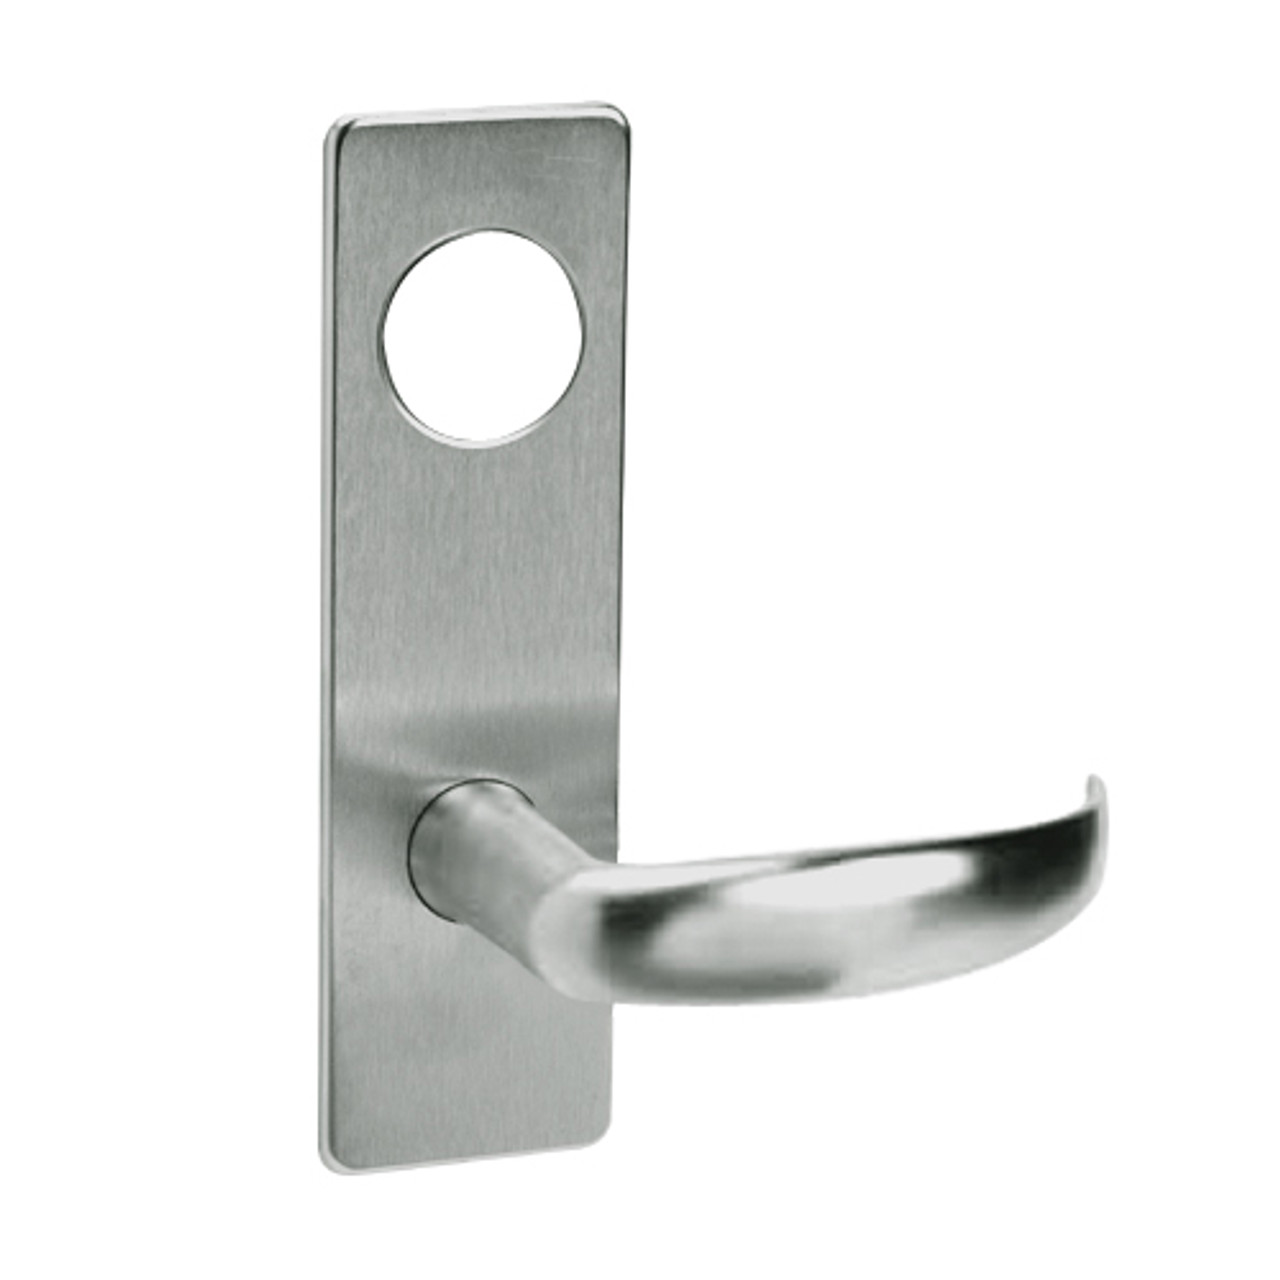 ML2092-PSM-619 Corbin Russwin ML2000 Series Mortise Security Institution or Utility Locksets with Princeton Lever with Deadbolt in Satin Nickel